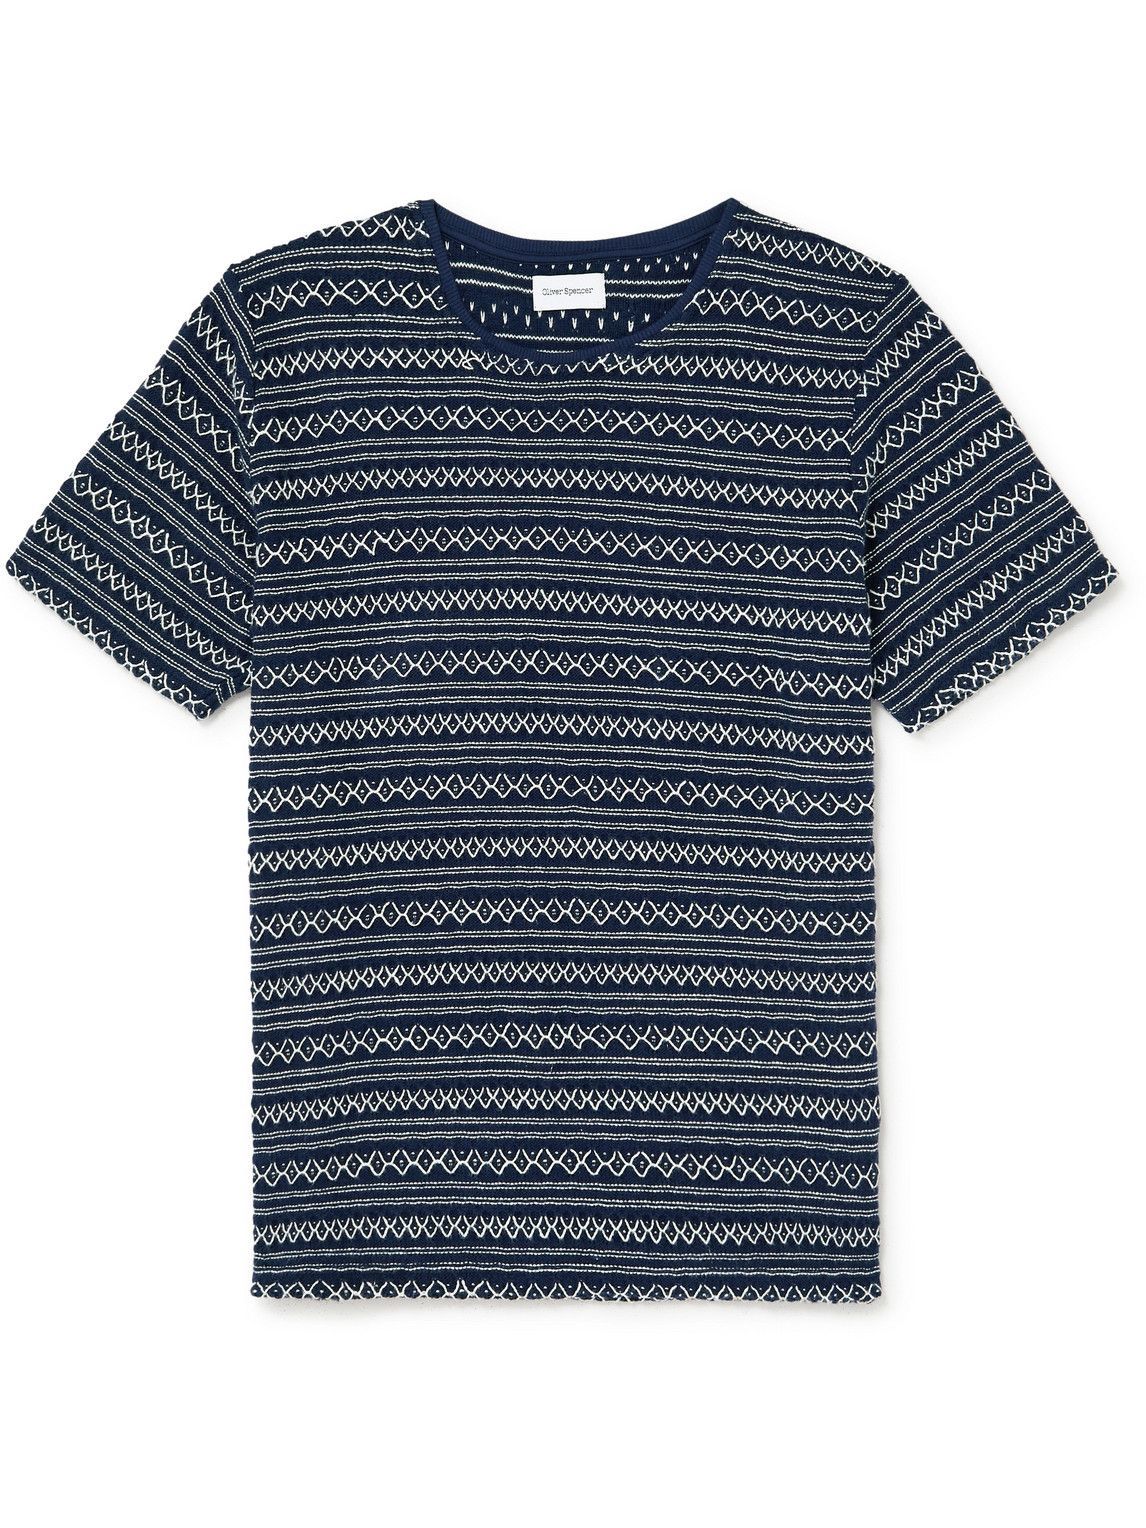 Photo: Oliver Spencer - Conduit Embroidered Crocheted Cotton T-Shirt - Blue